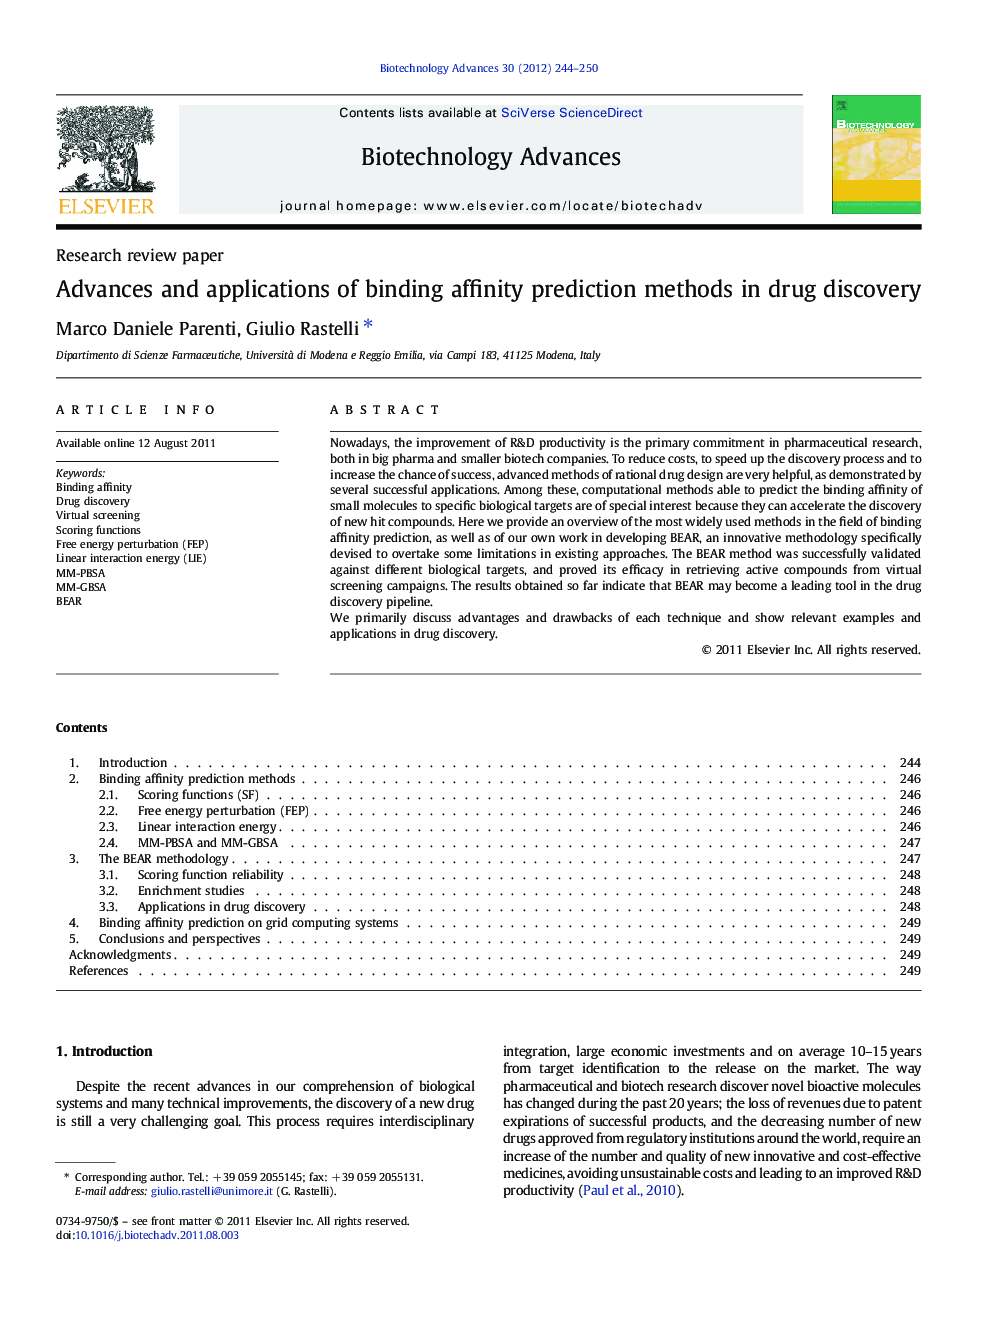 Advances and applications of binding affinity prediction methods in drug discovery